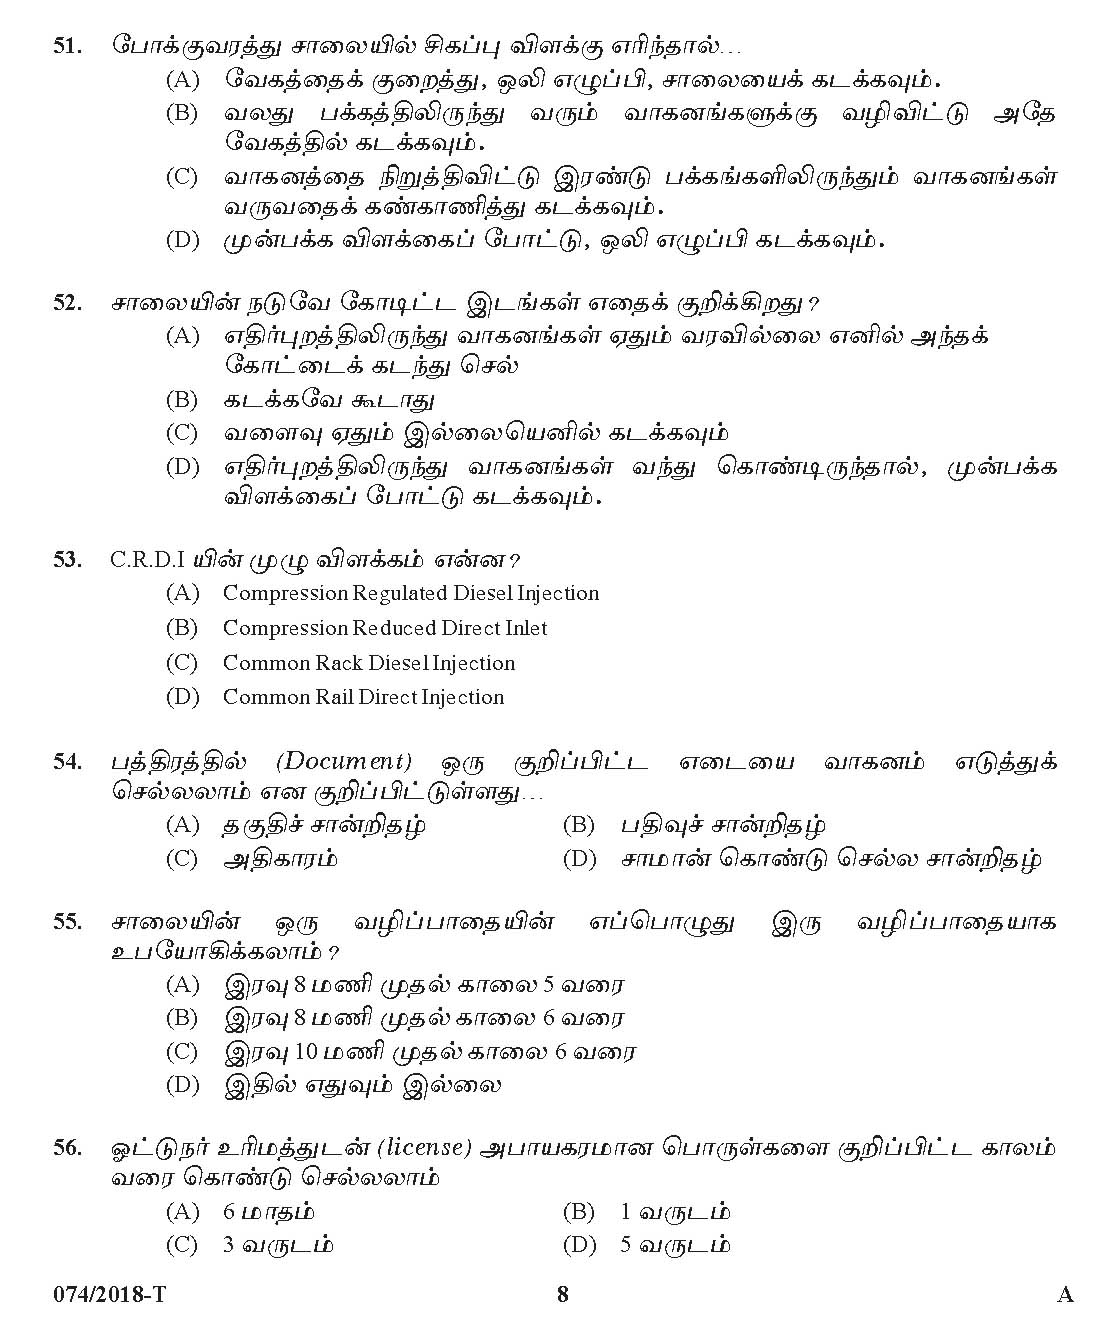 Kerala PSC Police Constable Driver Exam 2018 Question Paper Code 0742018 T 7